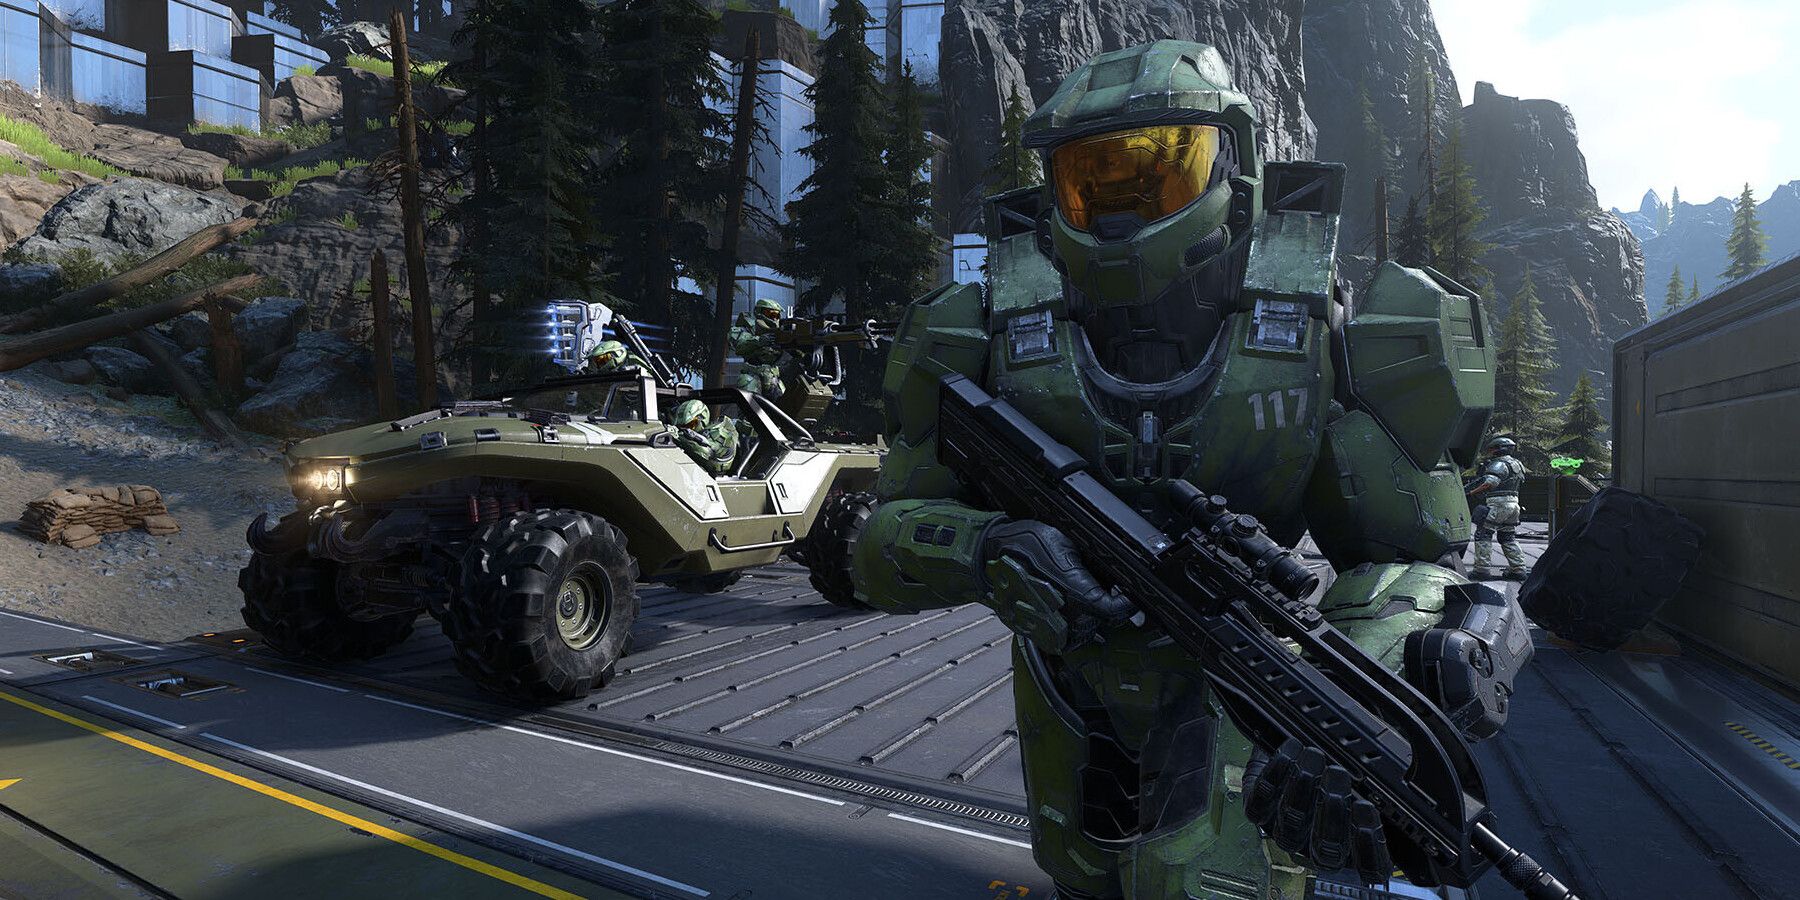 Halo Infinite Director Leaving 343 Industries, Campaign Team
'Restructures'